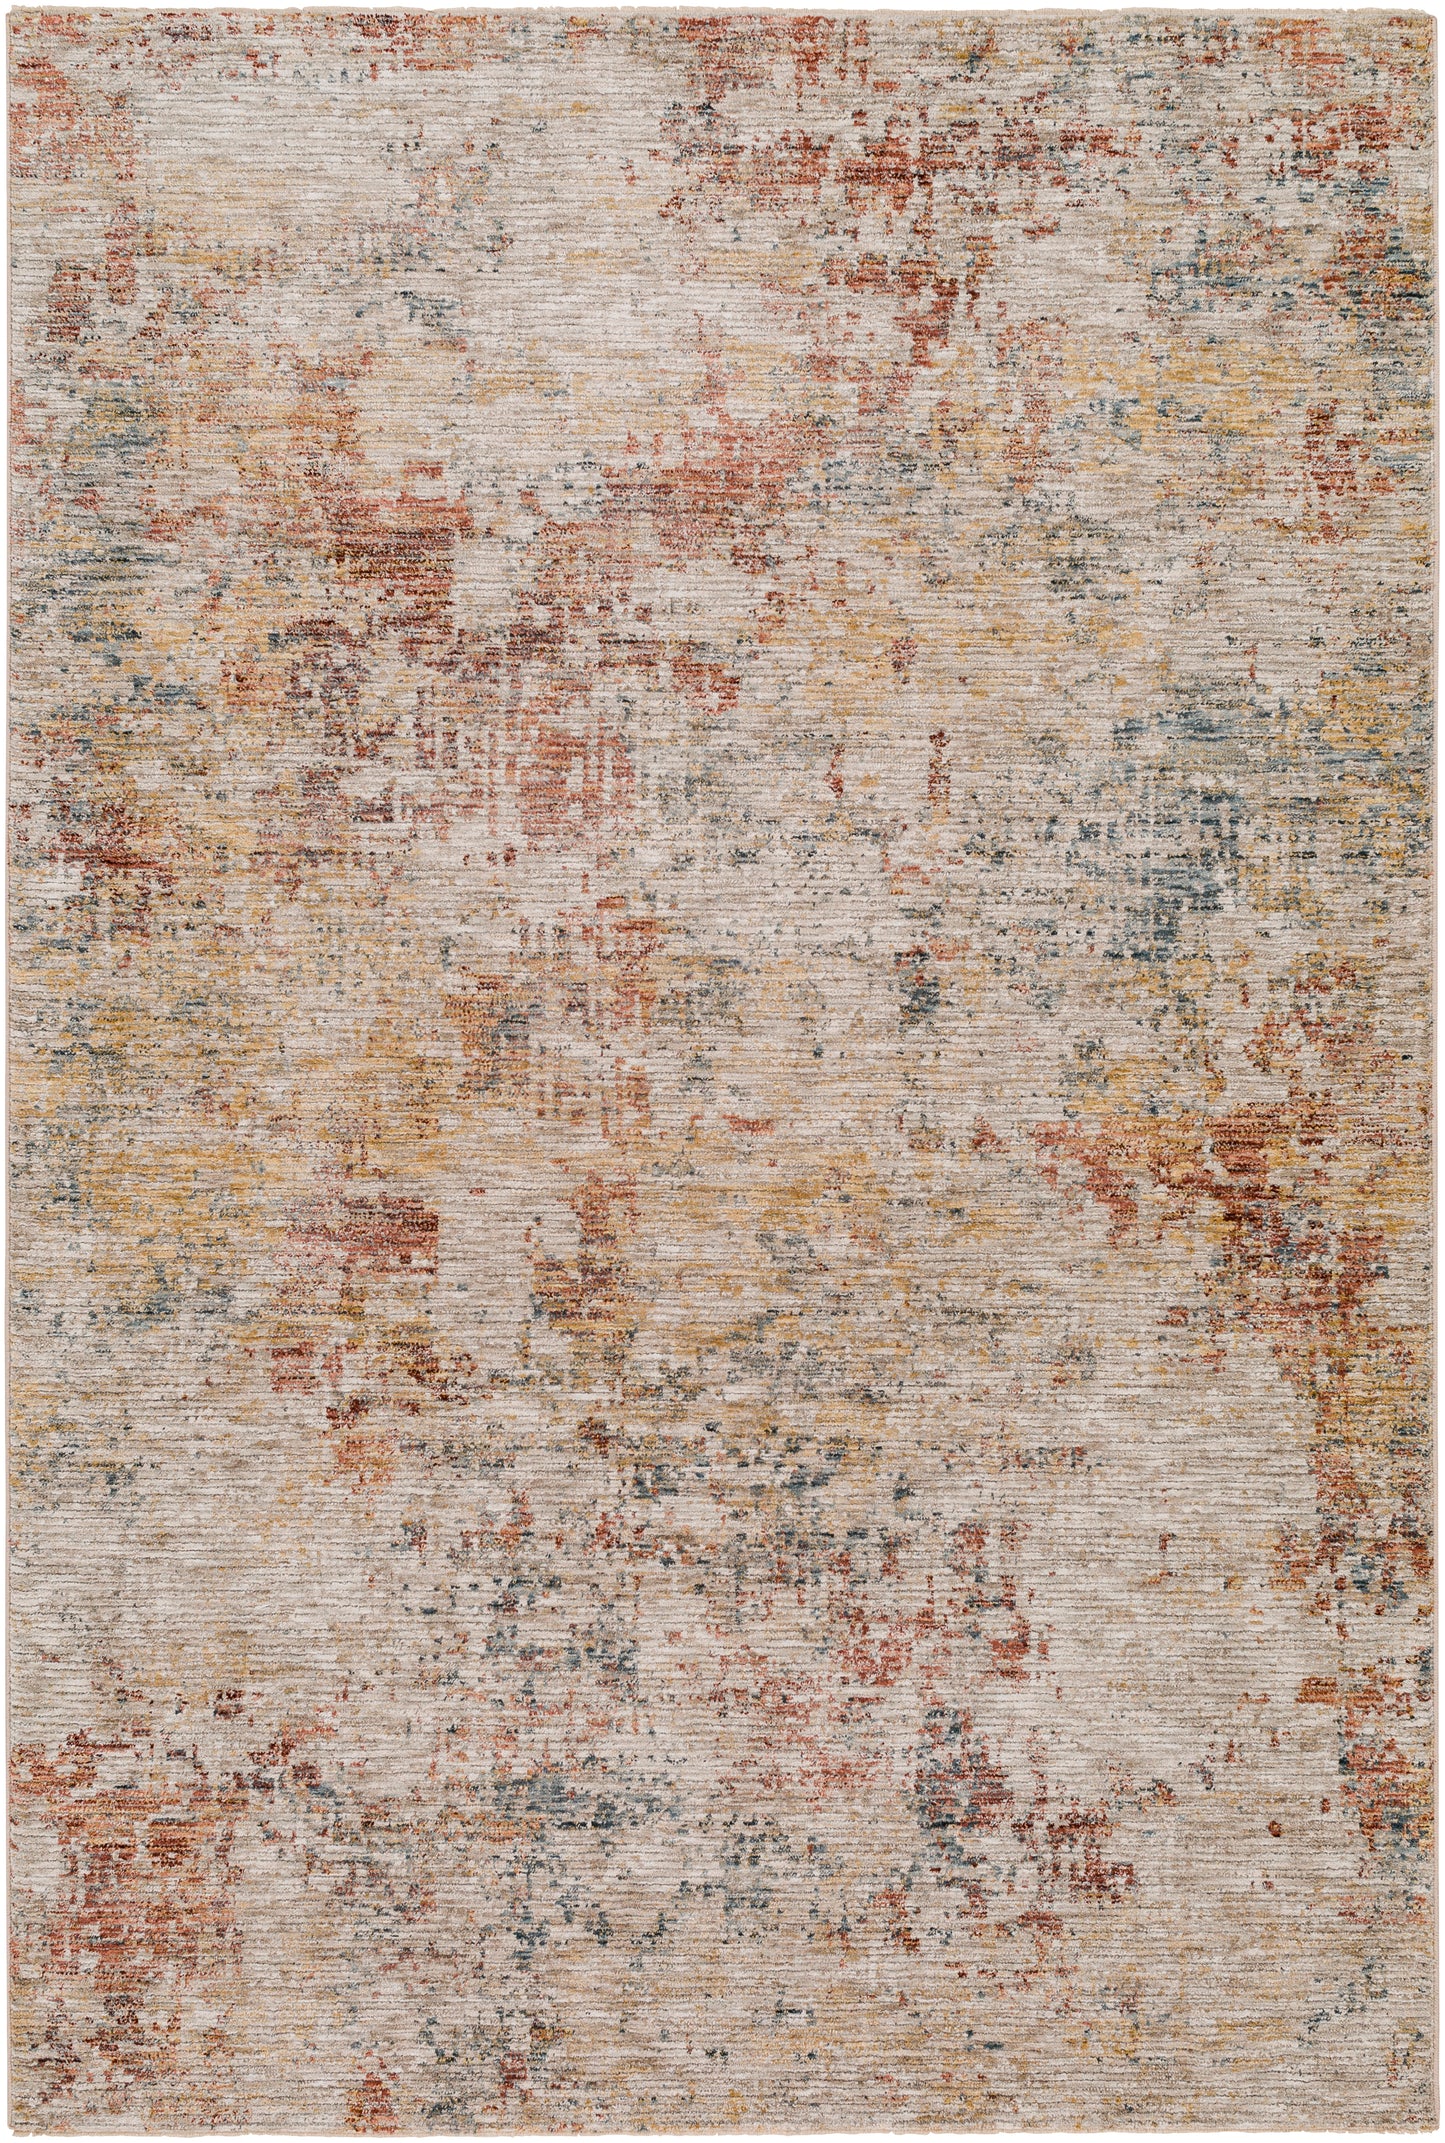 Naila 31168 Machine Woven Synthetic Blend Indoor Area Rug by Surya Rugs